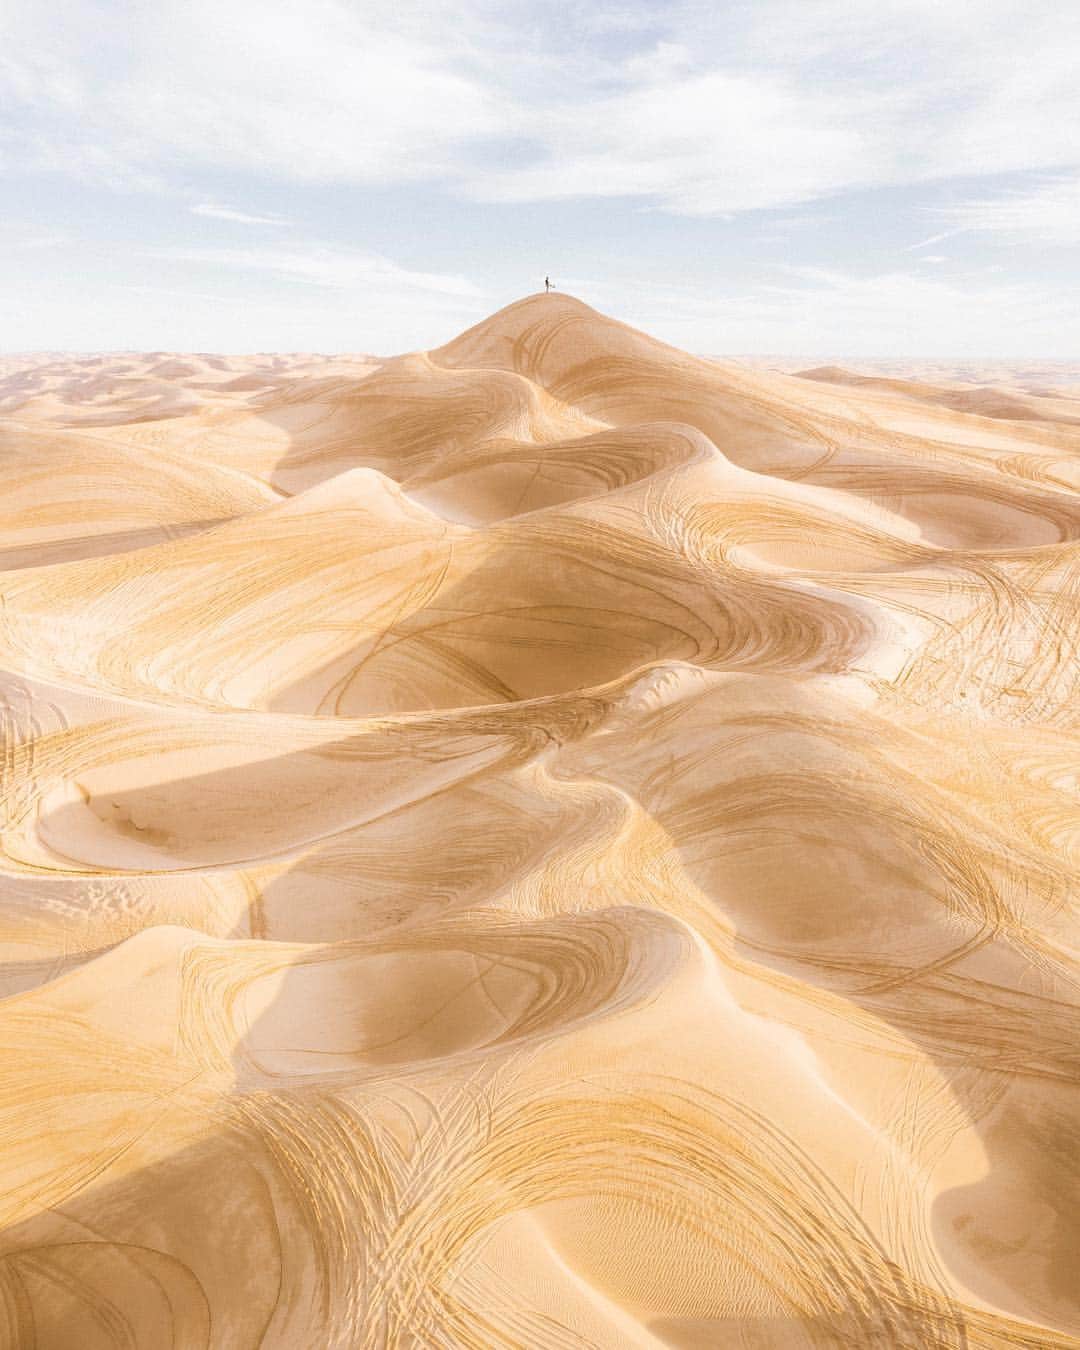 Adam Senatoriのインスタグラム：「Imperial Sand Dunes, CA / I passed on this last summer because it was about 110º F, so I put it in the back of my mind for "next time". That next time was last week, I happened to be 2 hours north and had 3 hours of sunlight left... so off I went. Made it just in time. Mavic Pro 2.  #getlost #beautifuldestinations #keepitwild #getoutstayout #takemoreadventures  #wondermore #forgeyourownpath #nomadstories #alwaysgo」